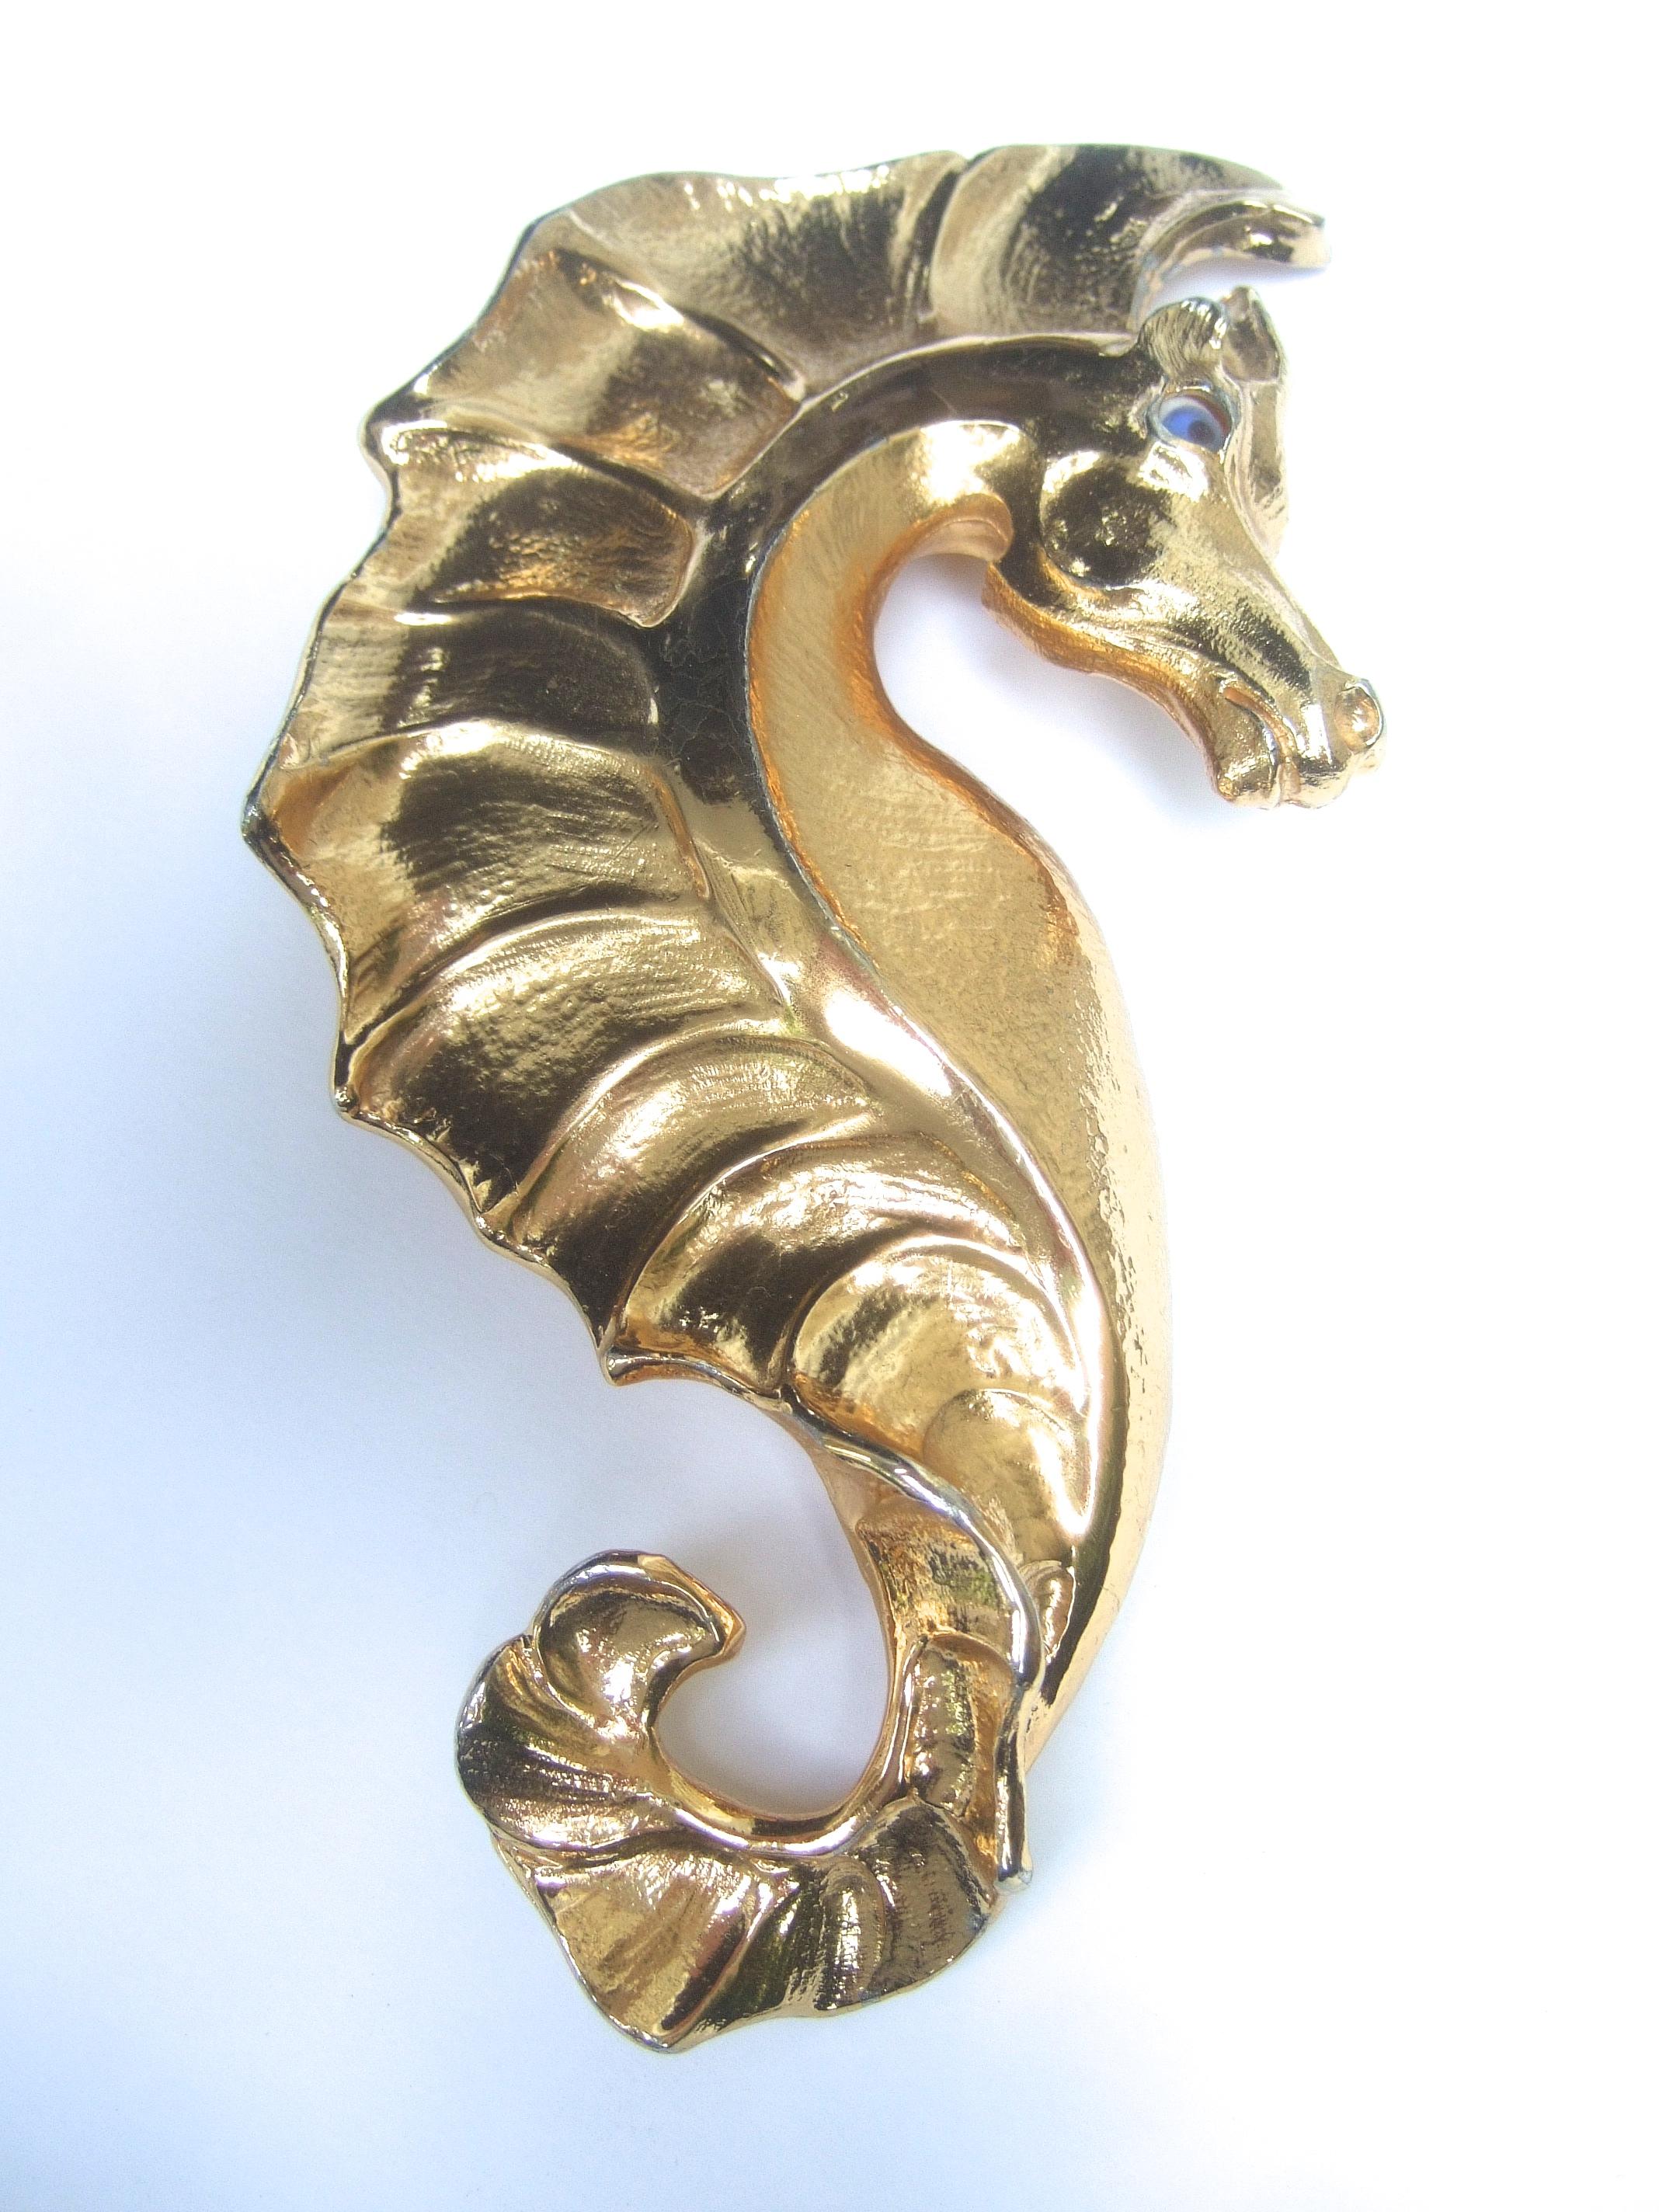 Brown Christopher Ross Rare Massive 24k Gold Plated Seahorse Belt Buckle c 1980s For Sale